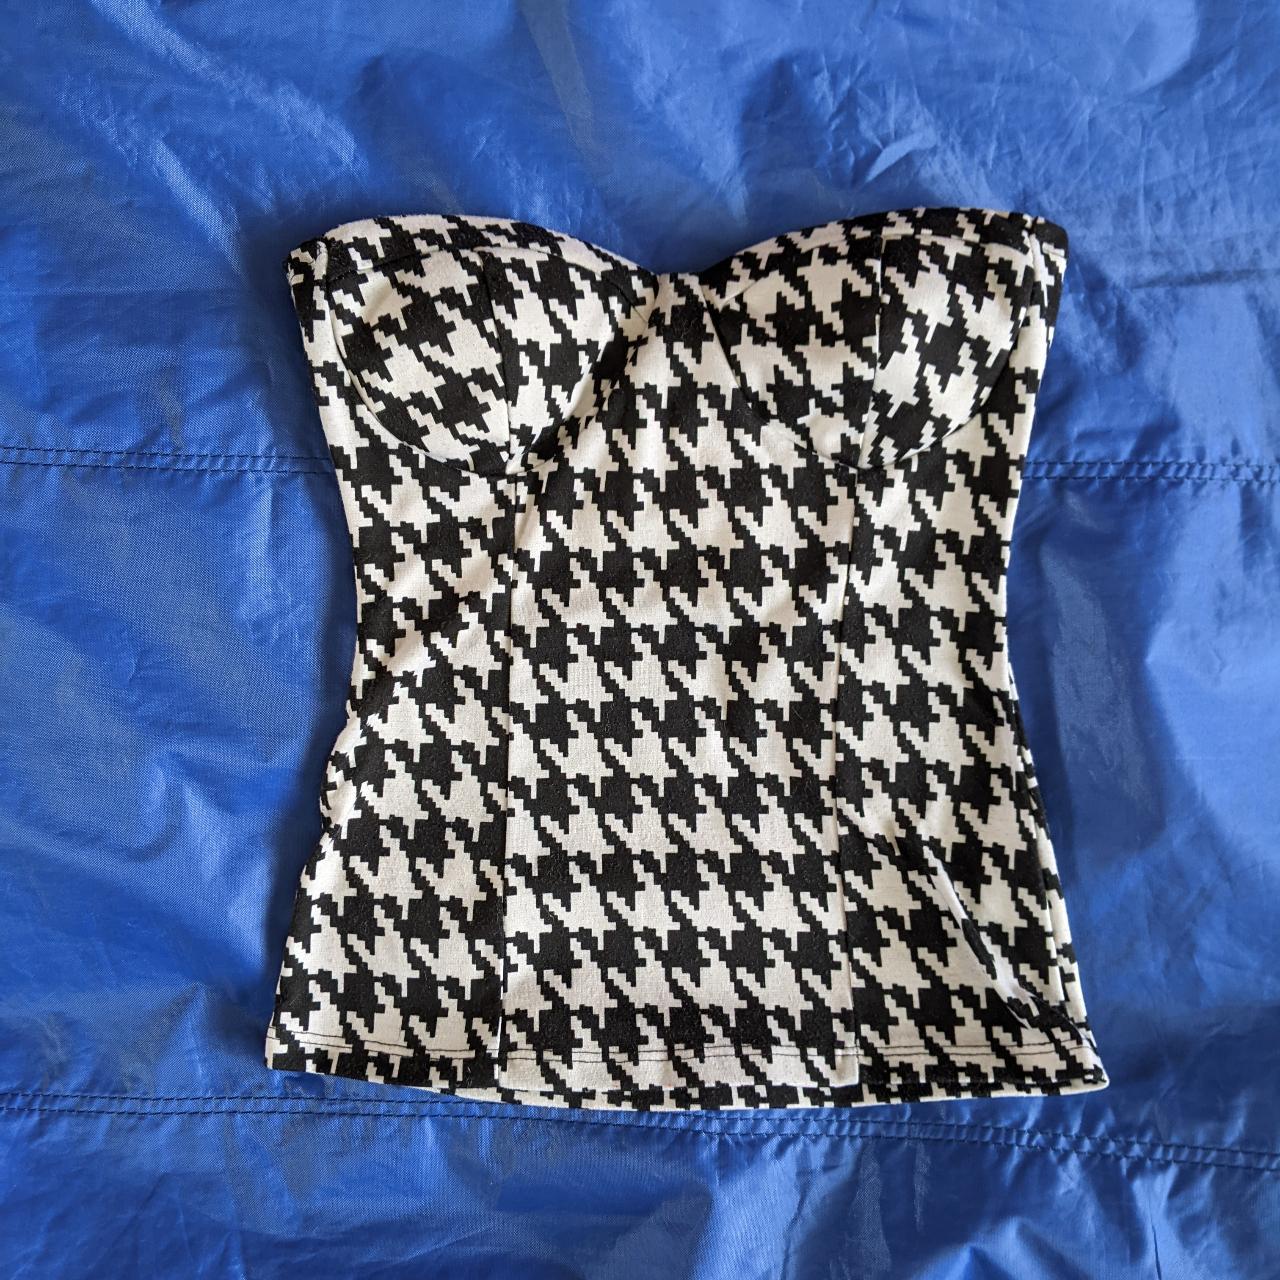 Product Image 1 - Houndstooth bustier

Stays up nicely with